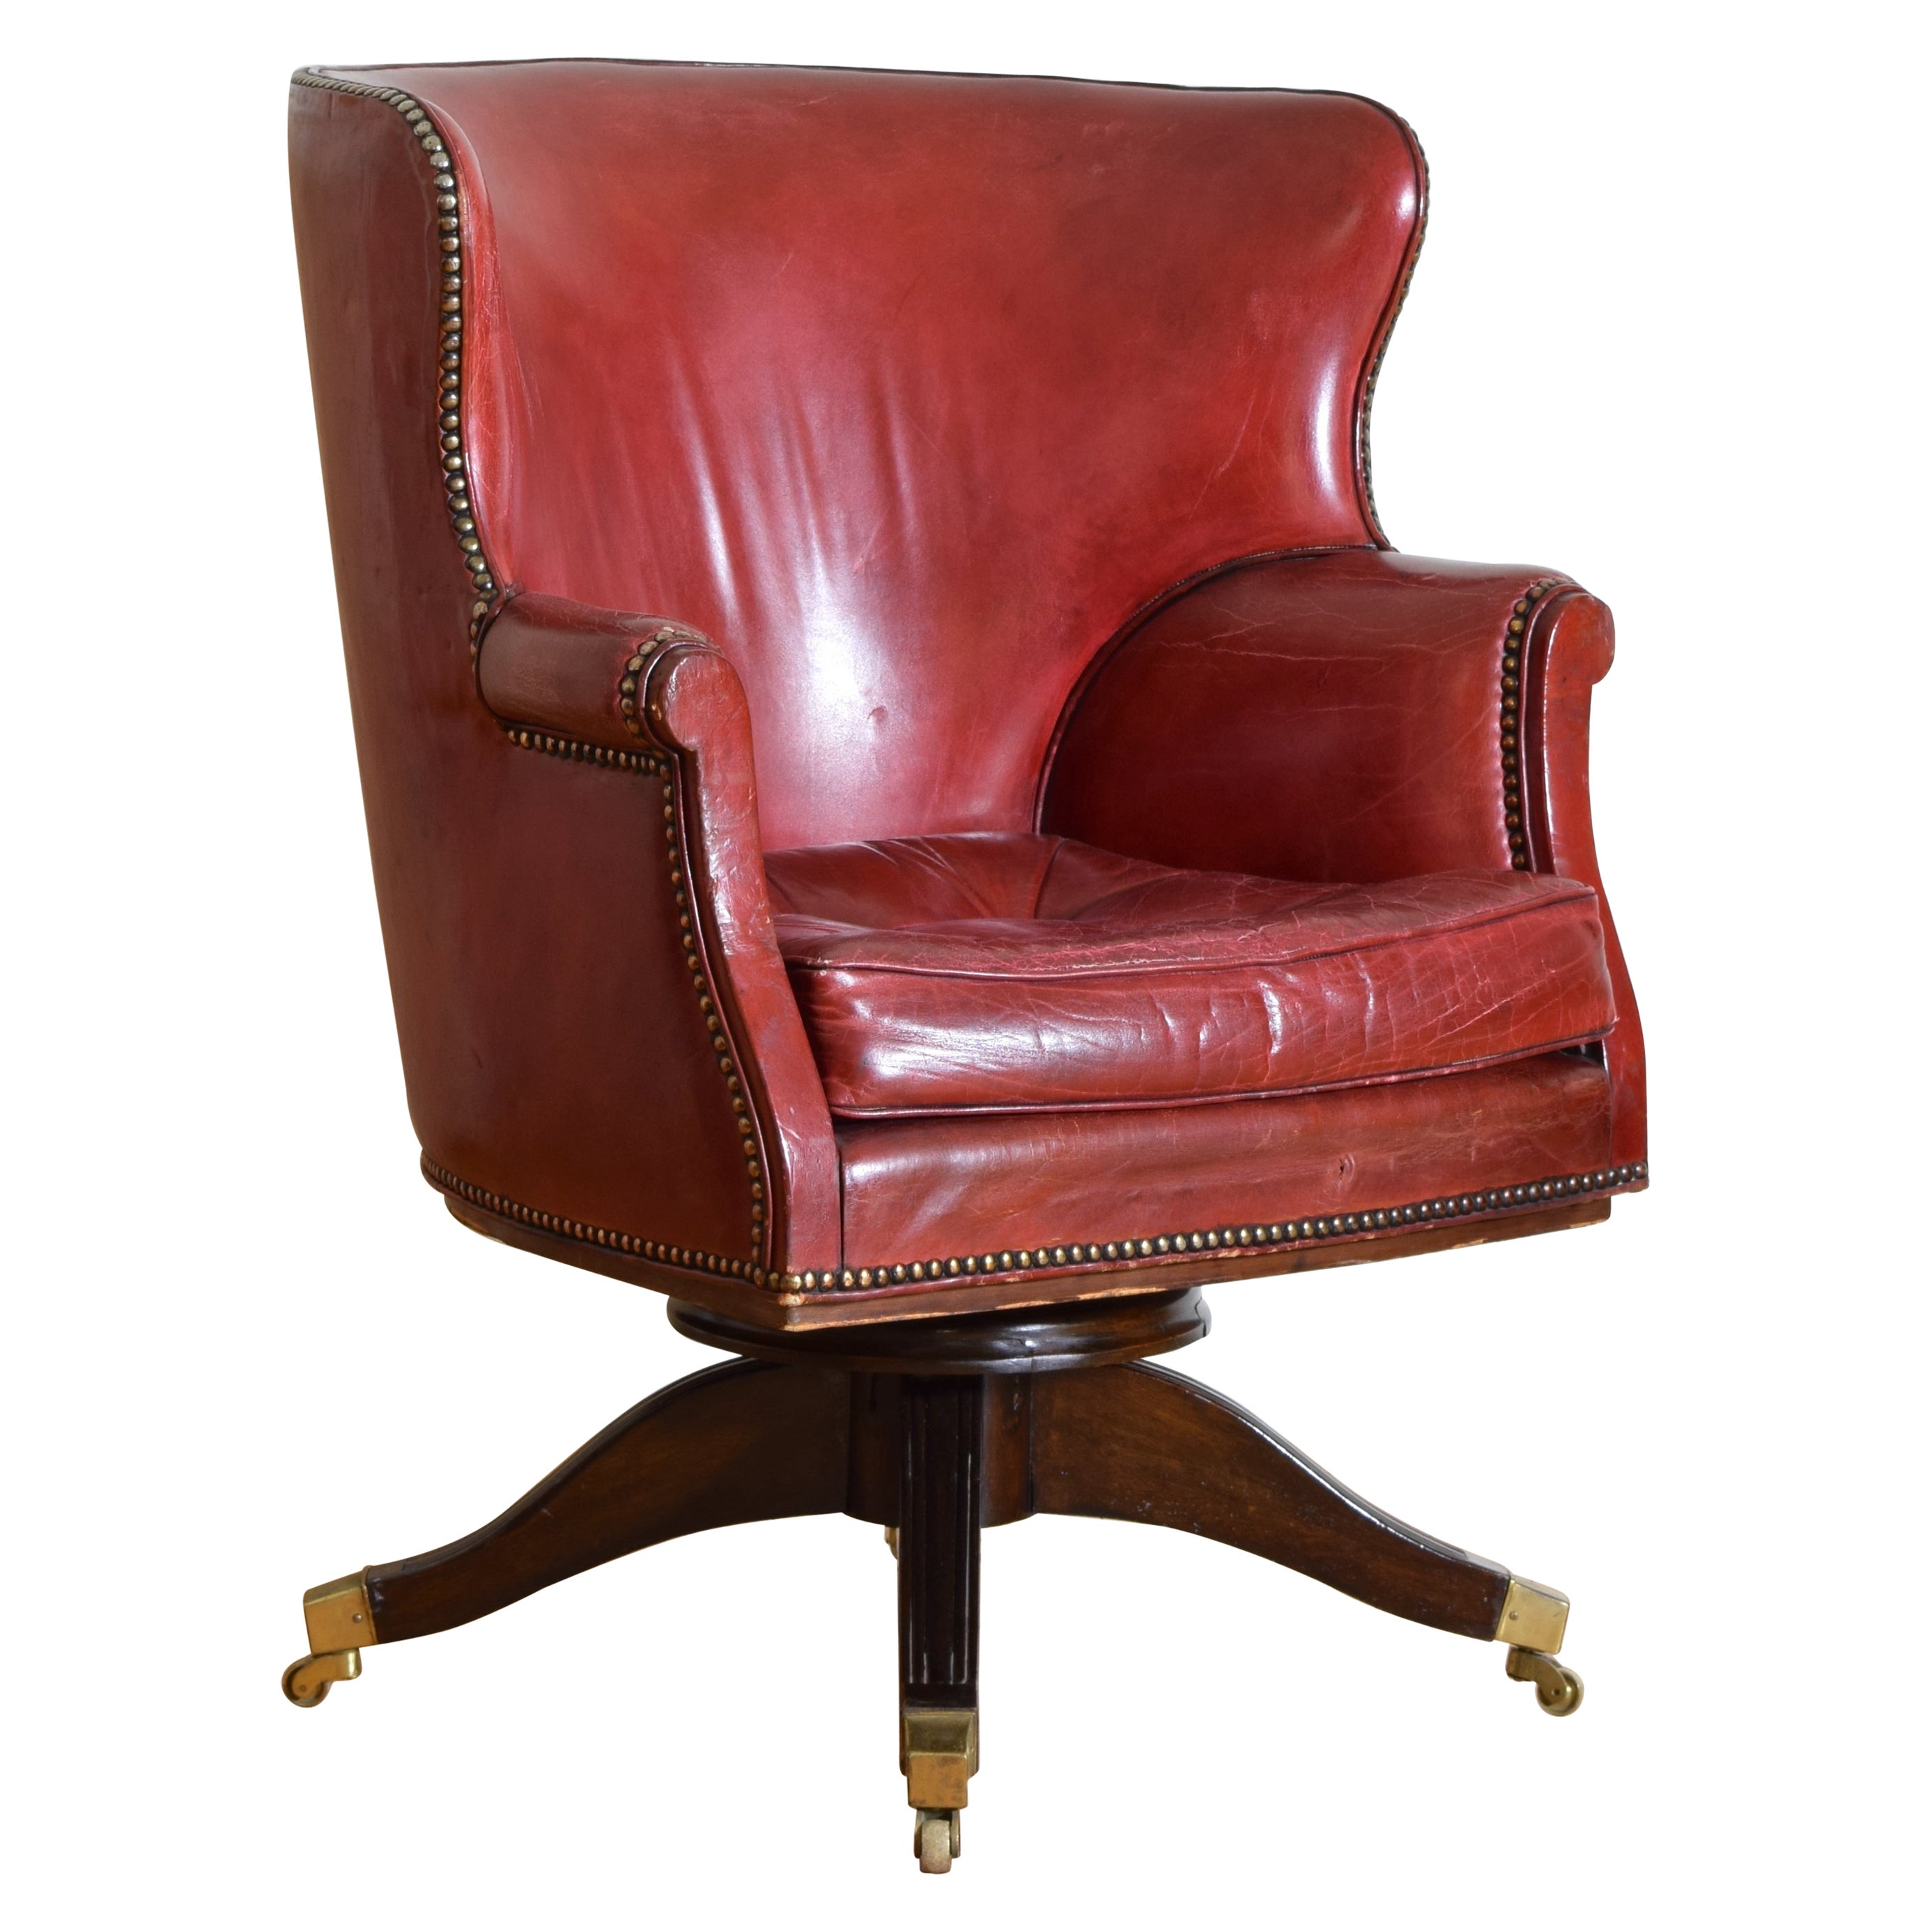 English Georgian Style Mahogany & Leather Upholstered Swivel Wing Chair For Sale